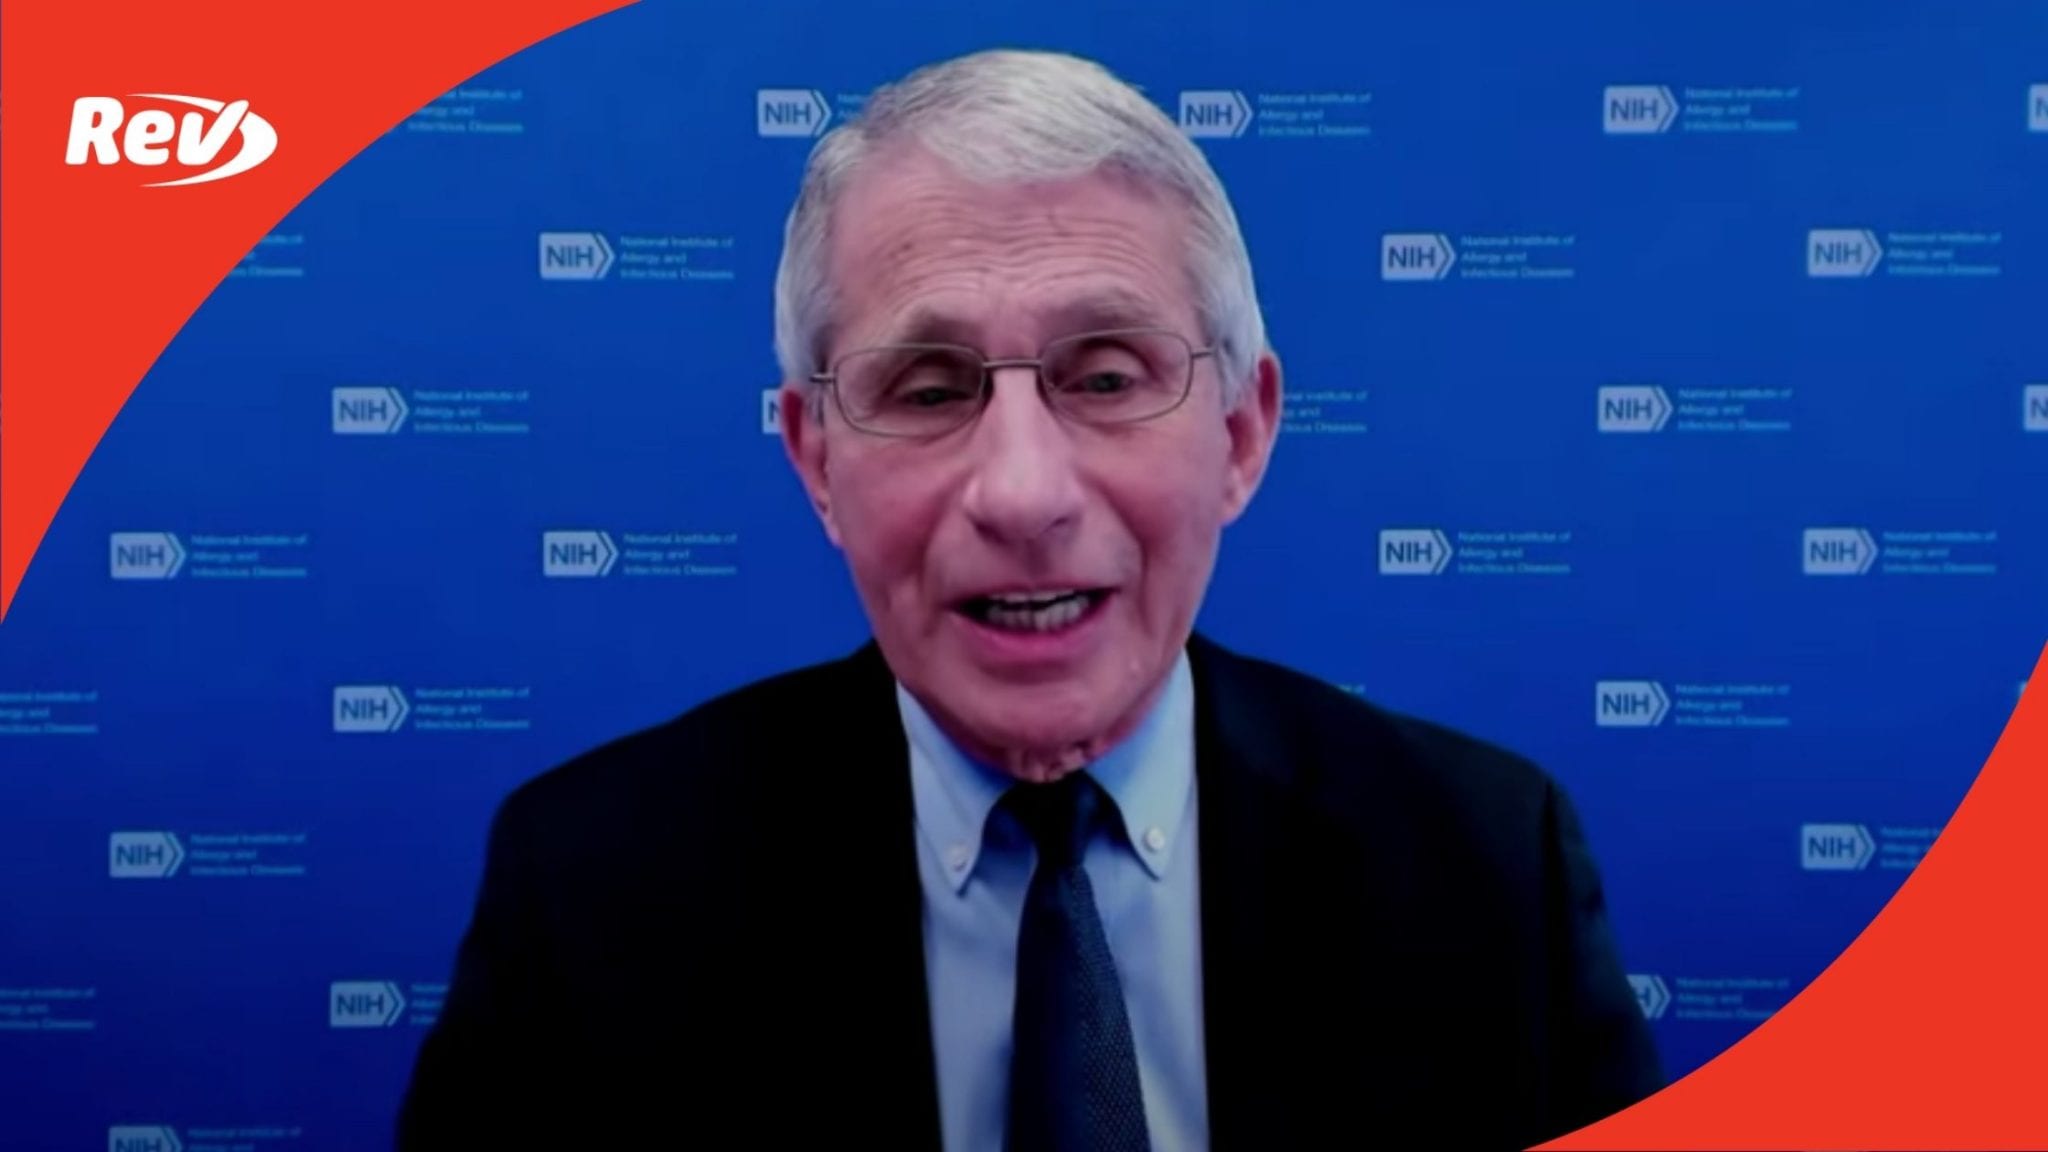 White House COVID-19 Task Force, Dr. Fauci Press Conference Transcript February 26